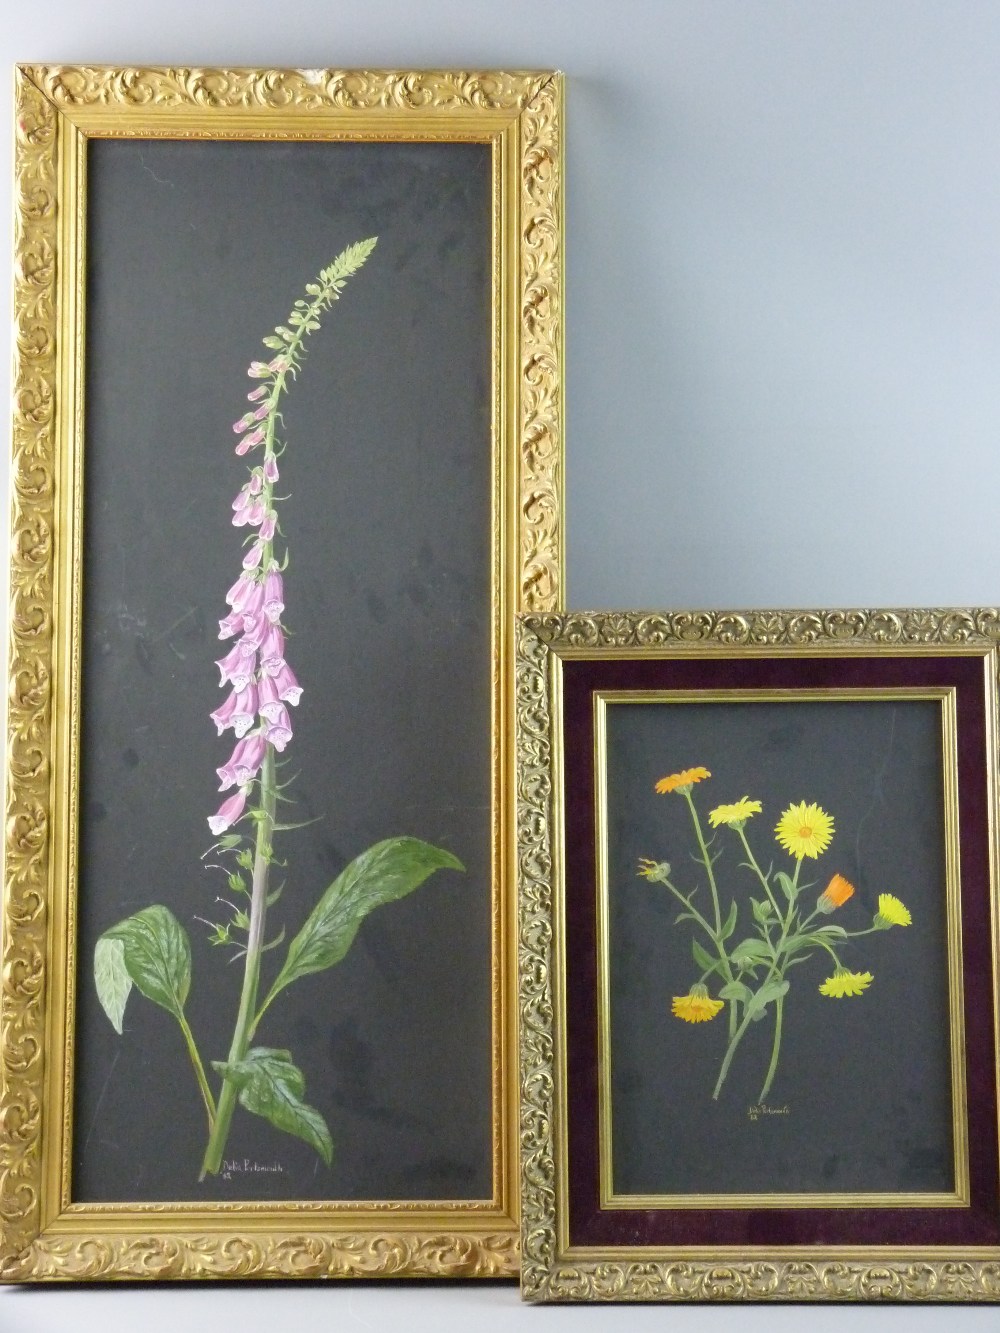 DELIA PORTSMOUTH two oils on board - still life, floral studies, one of wild yellow flowers, signed,